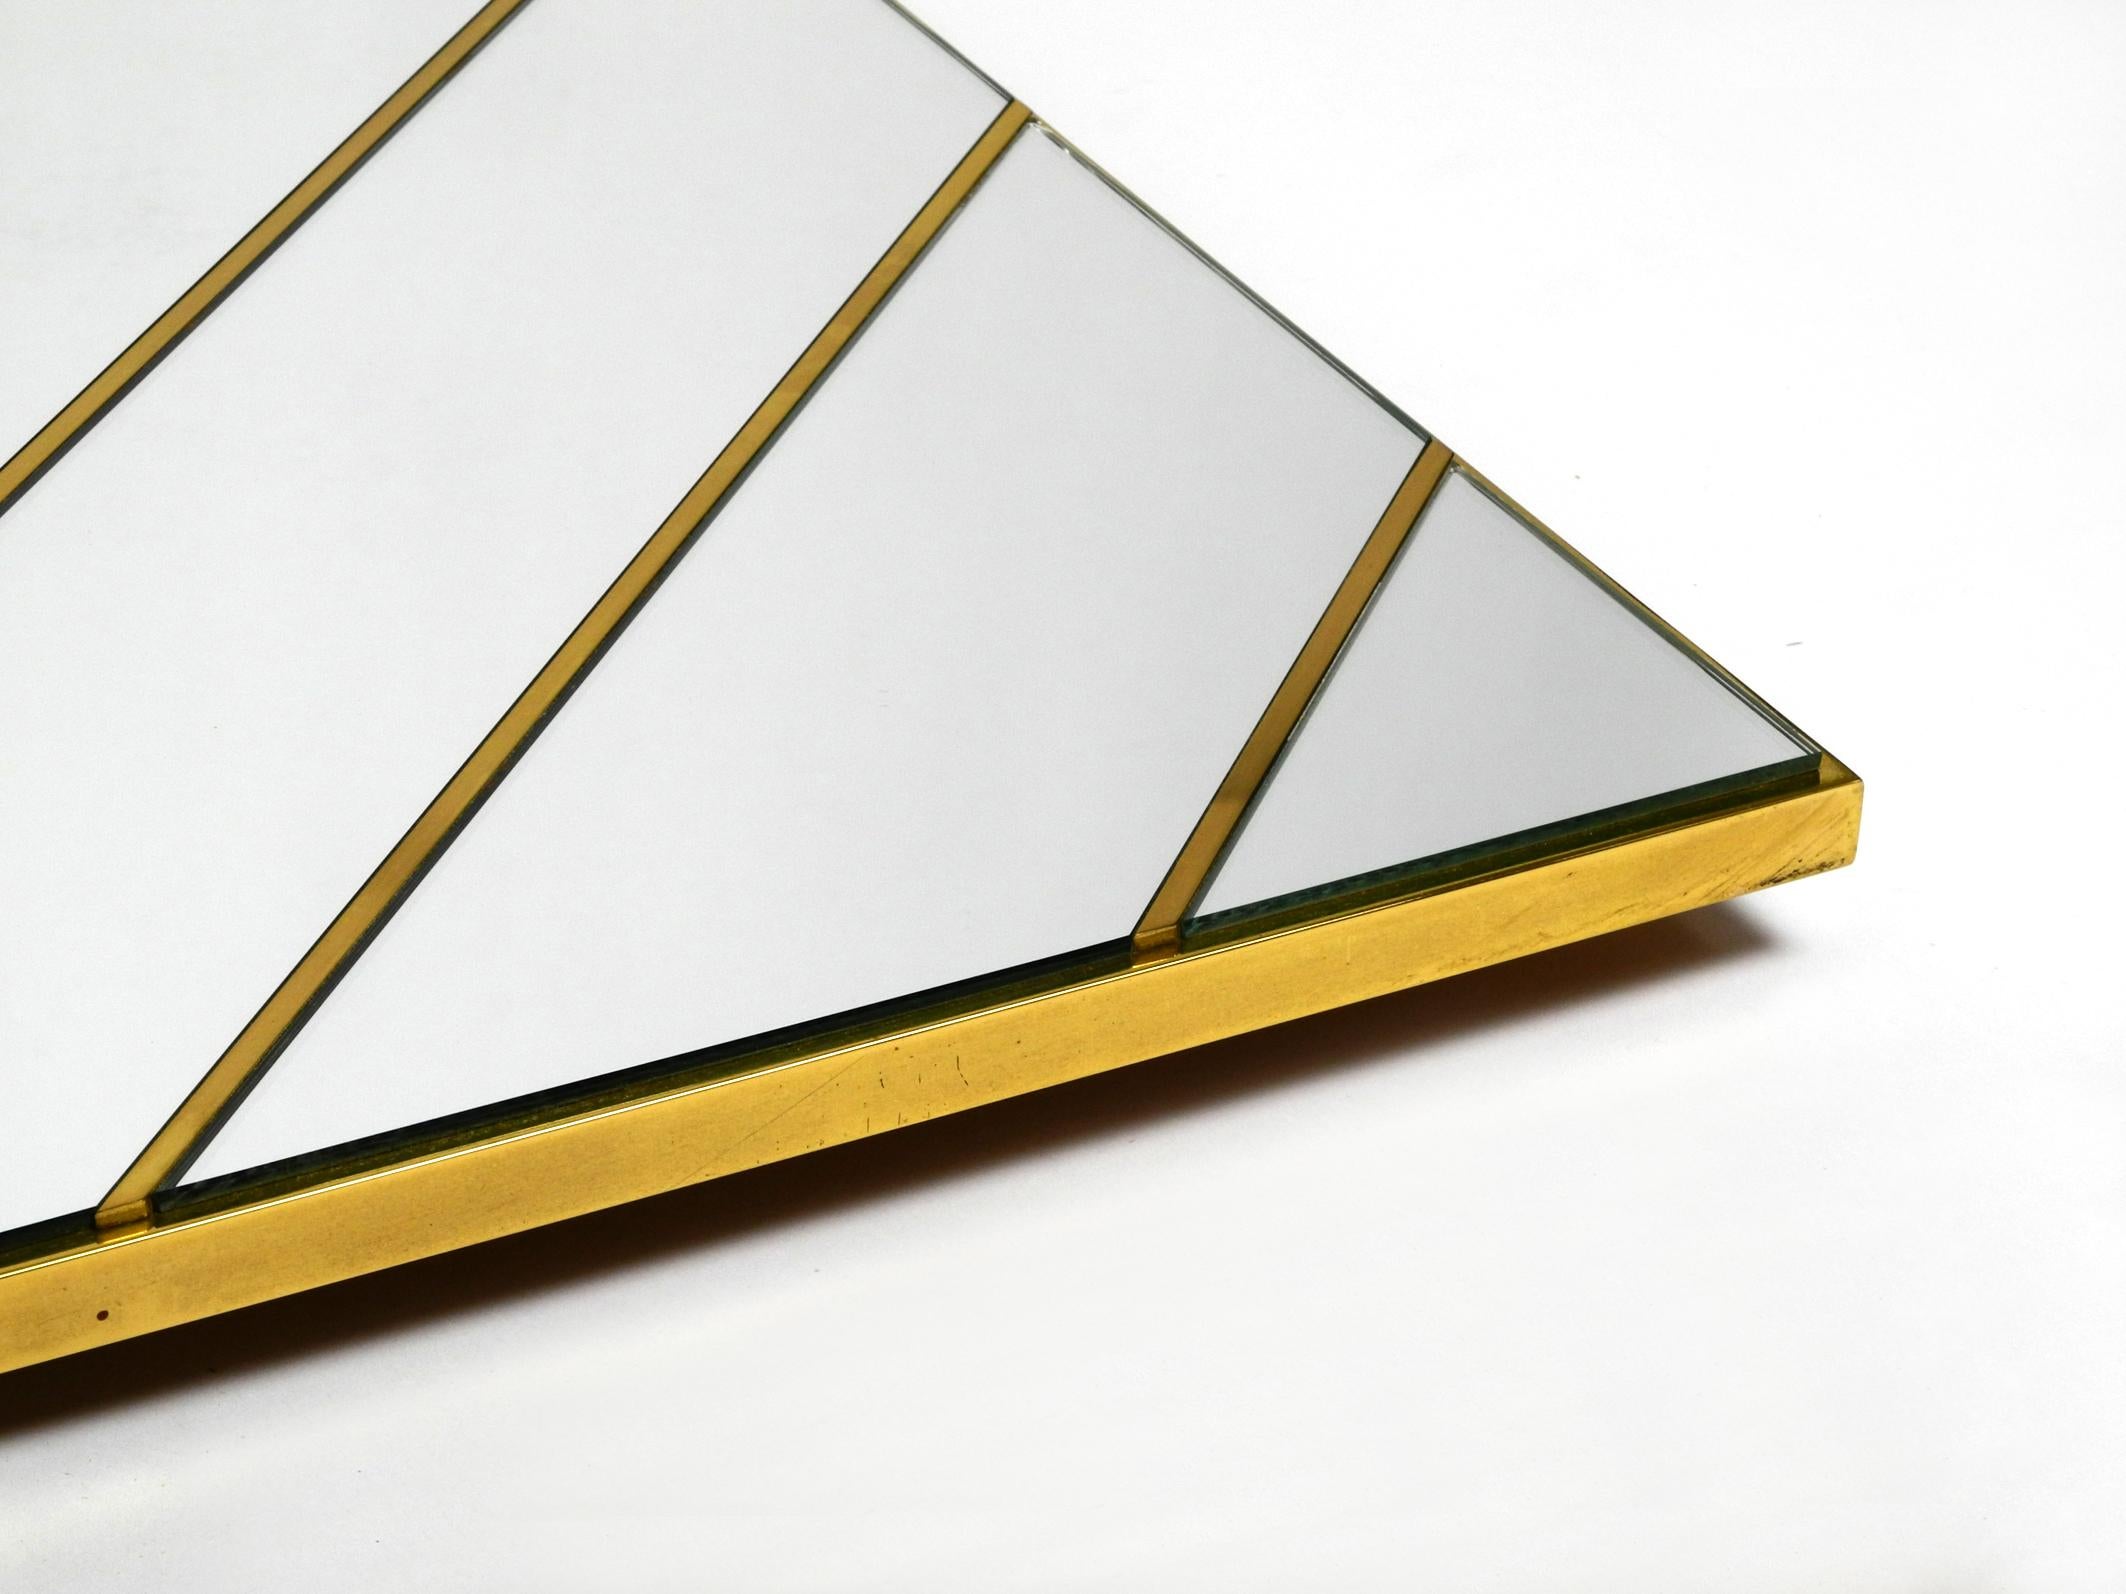 Large, Exceptional 1970s Brass Wall Mirror with Diagonal Mirror Strips For Sale 12